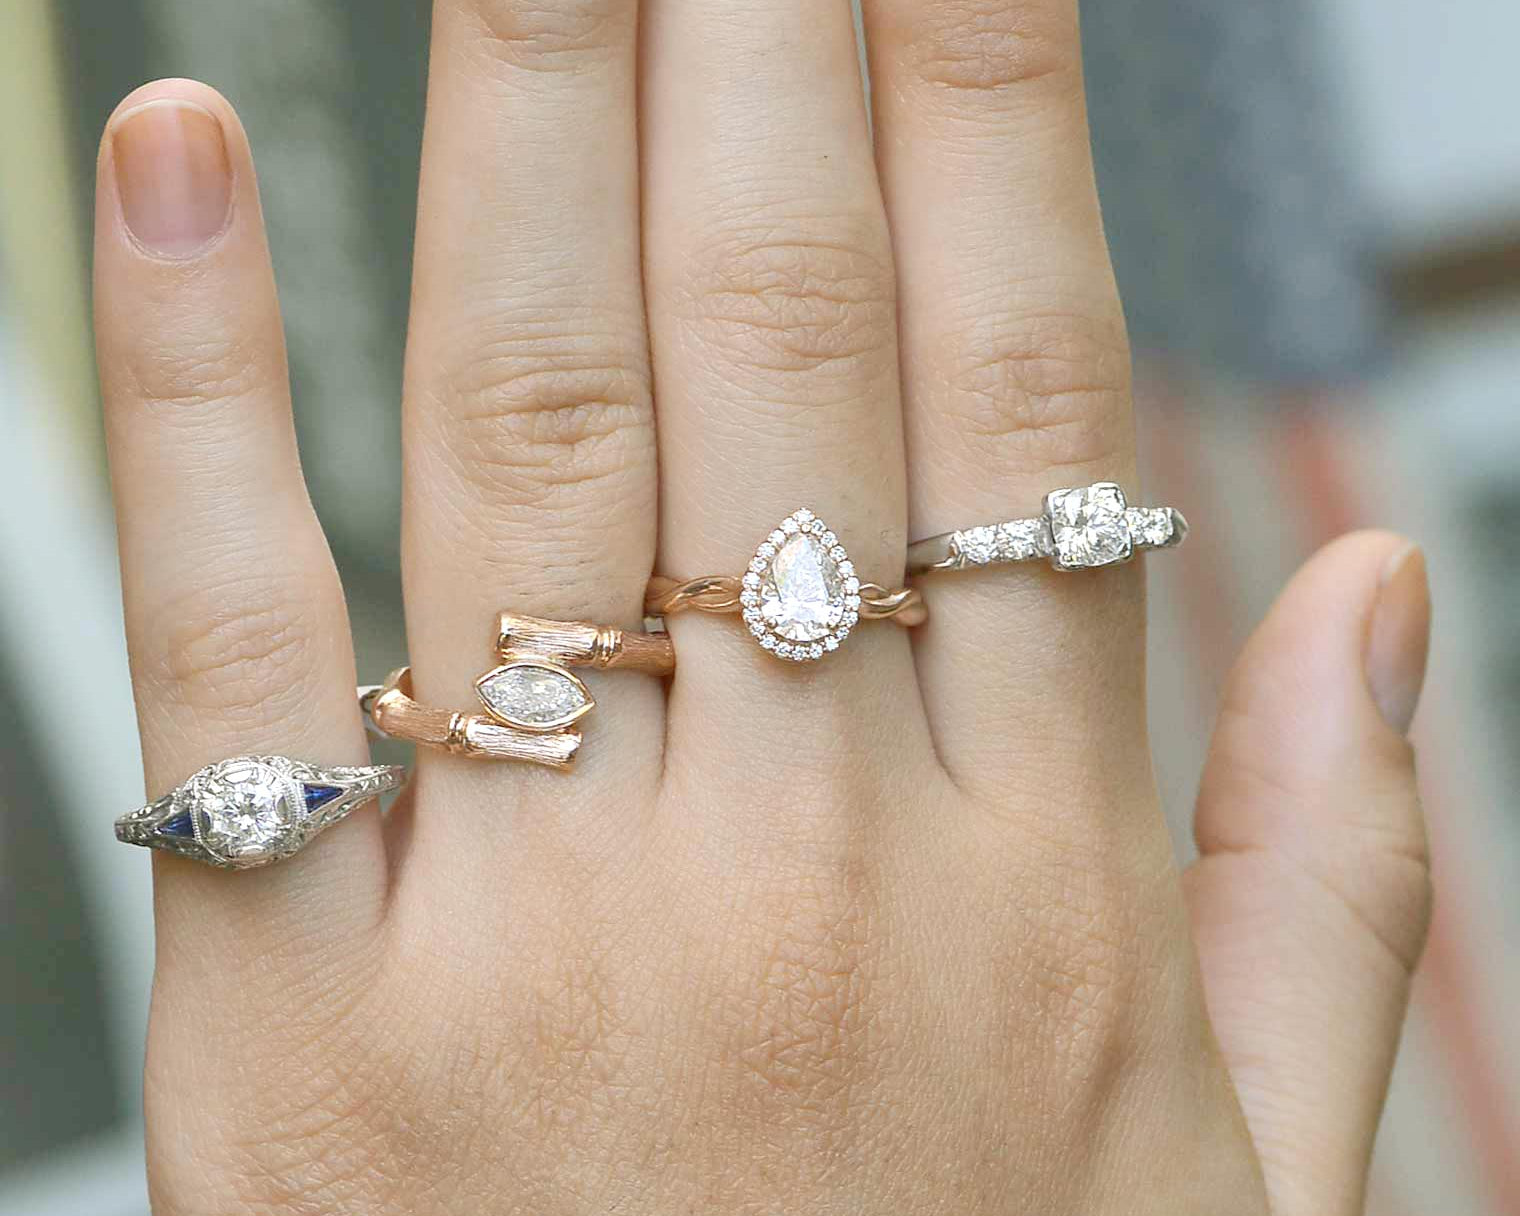 A variety of vintage and retro diamond rings crafted of platinum and rose gold.